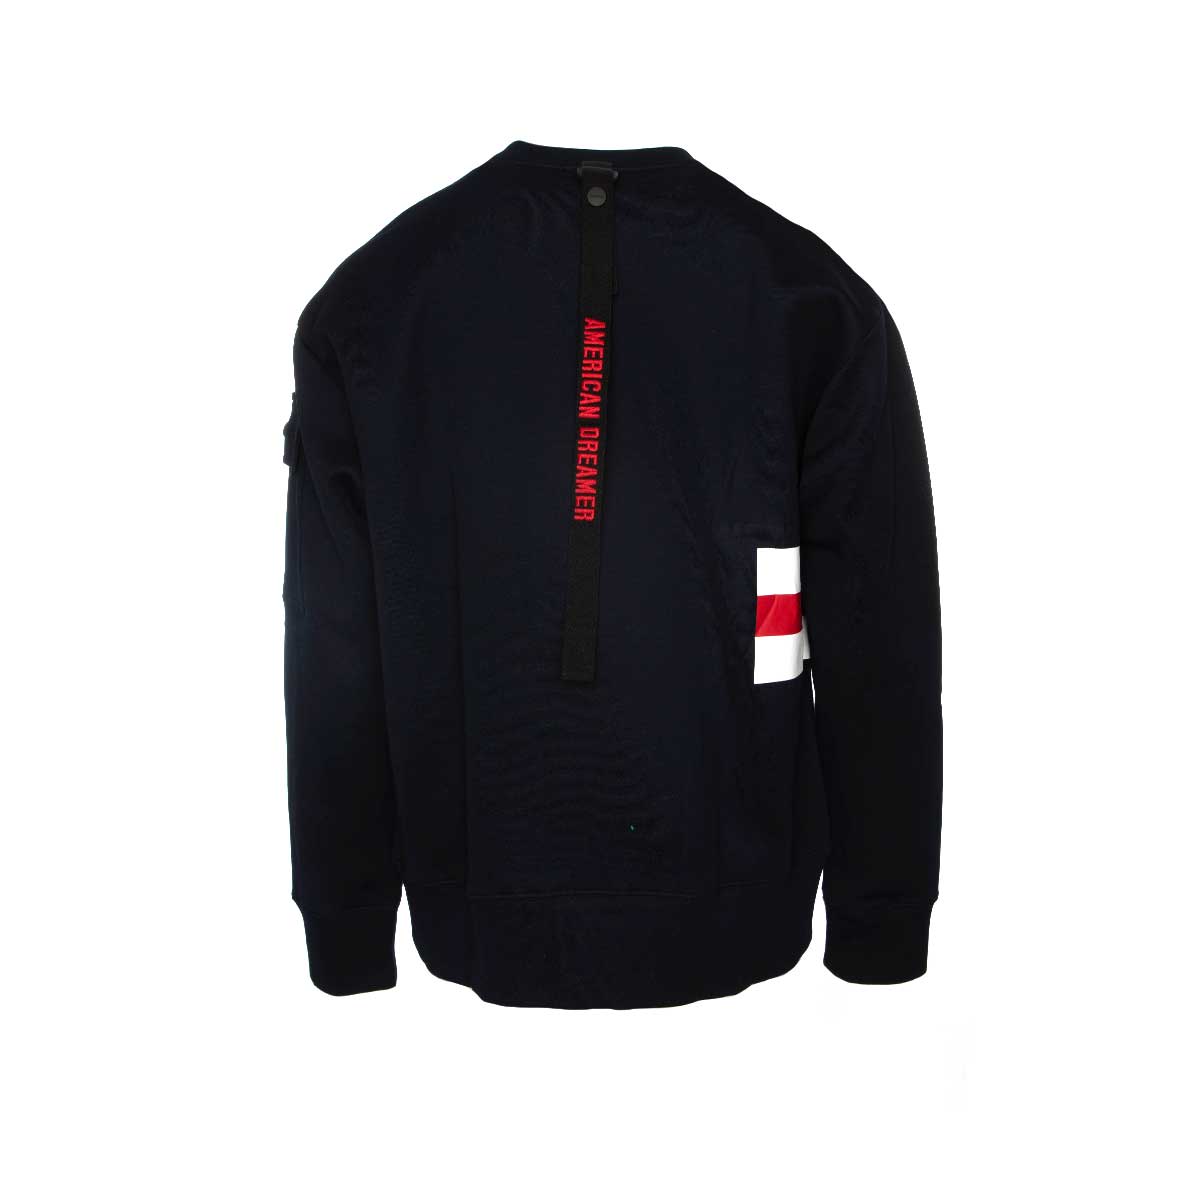 Tim Coppens Fire Crew Sweater (Navy)